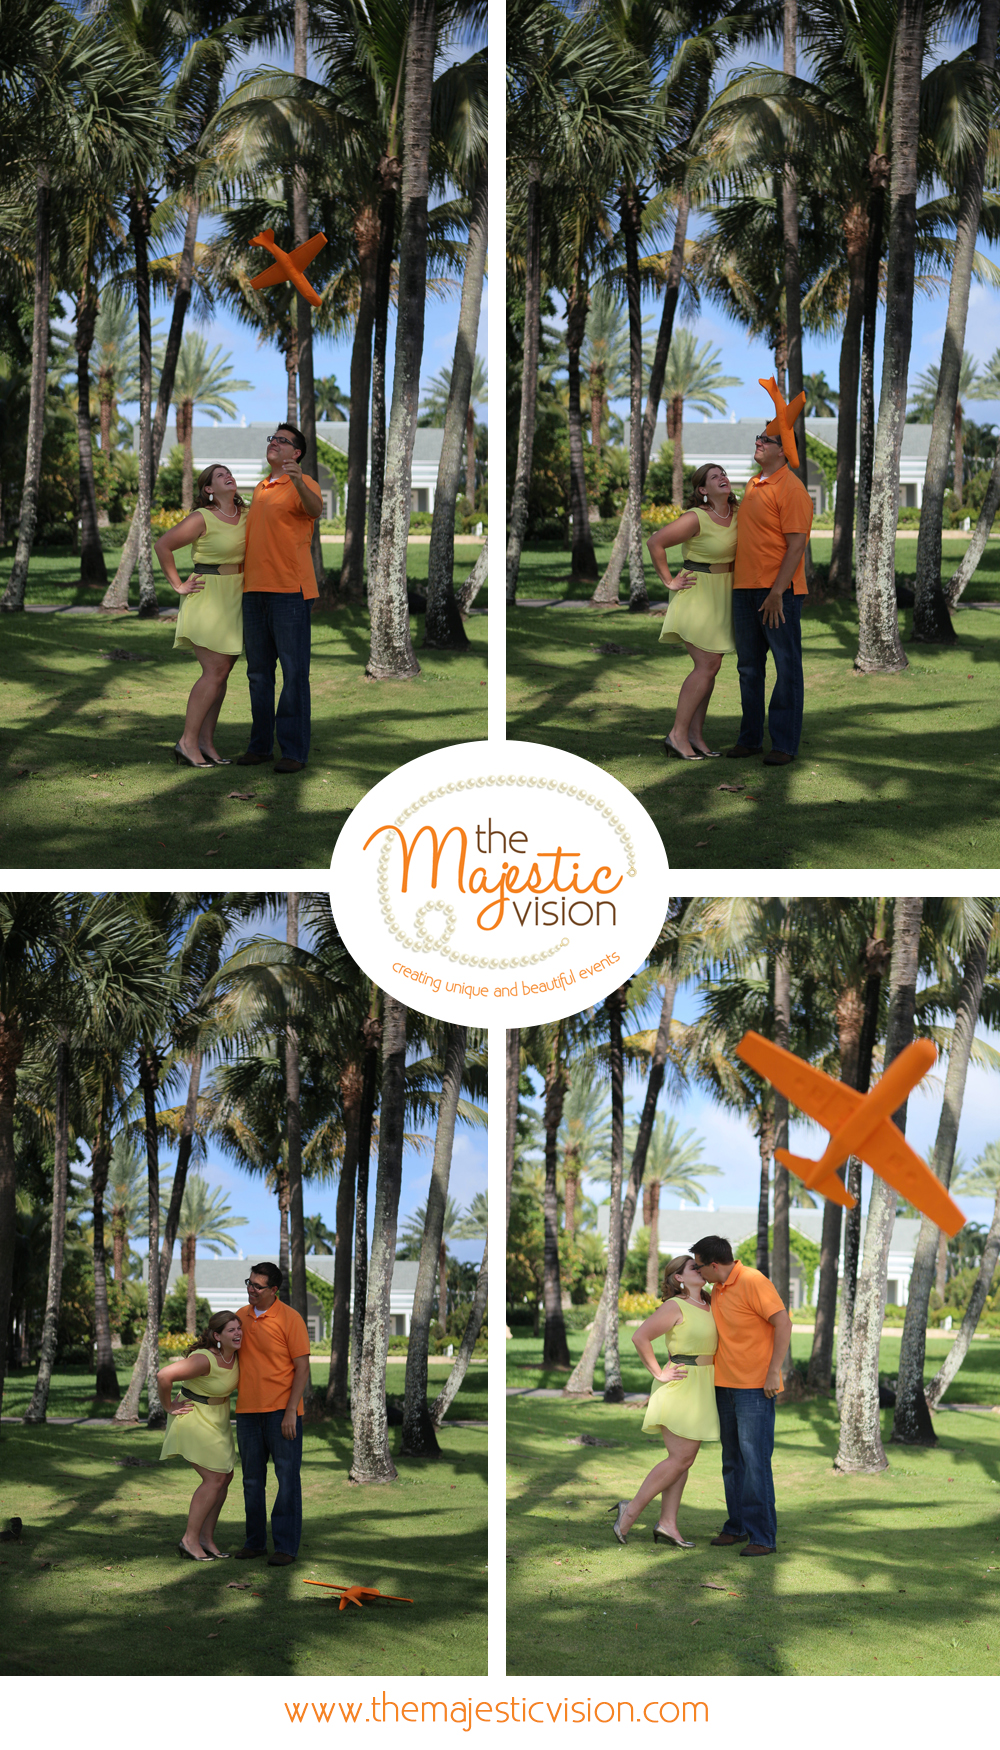 Travel Theme Engagement Session | The Majestic Vision Wedding Planning | Royal Poinciana Chapel in Palm Beach, FL | www.themajesticvision.com | Robert Madrid Photography